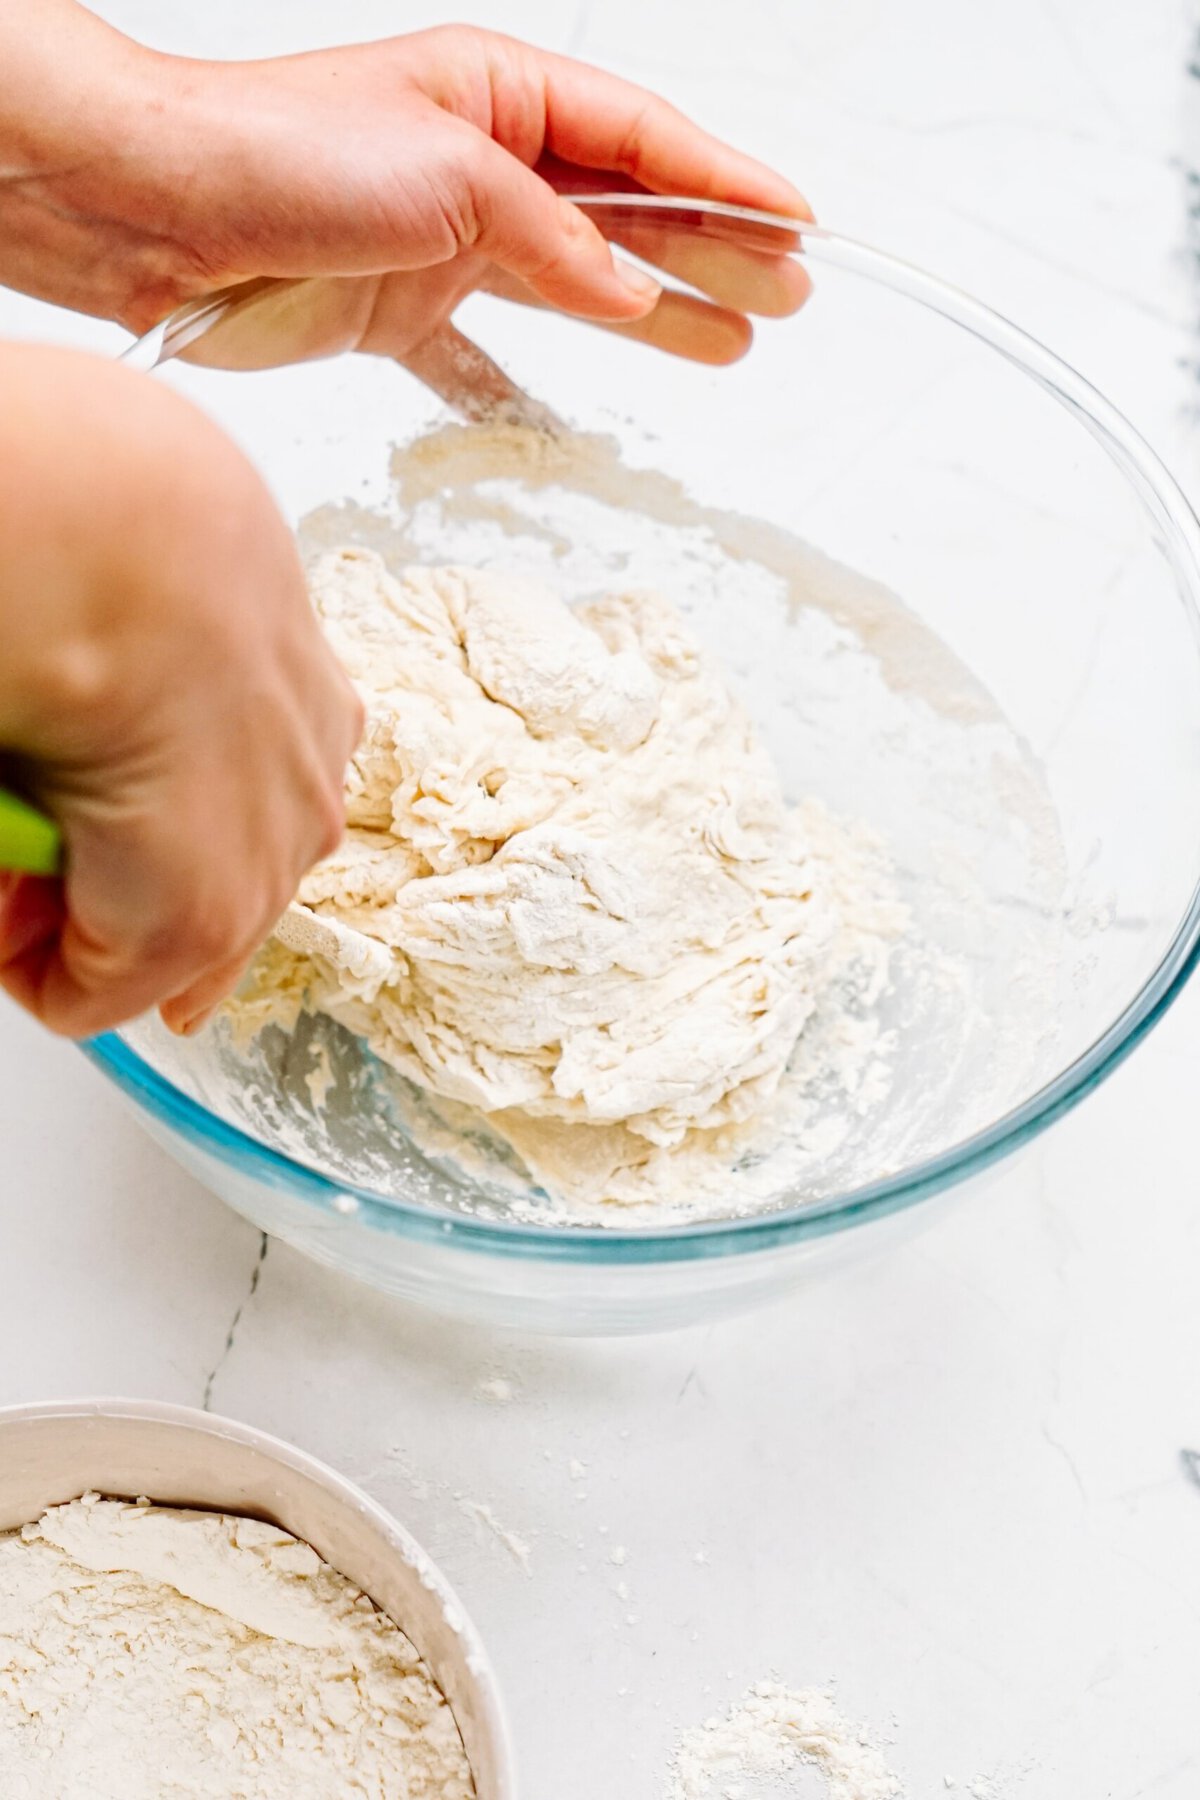 a person mixing dough ingredients together 